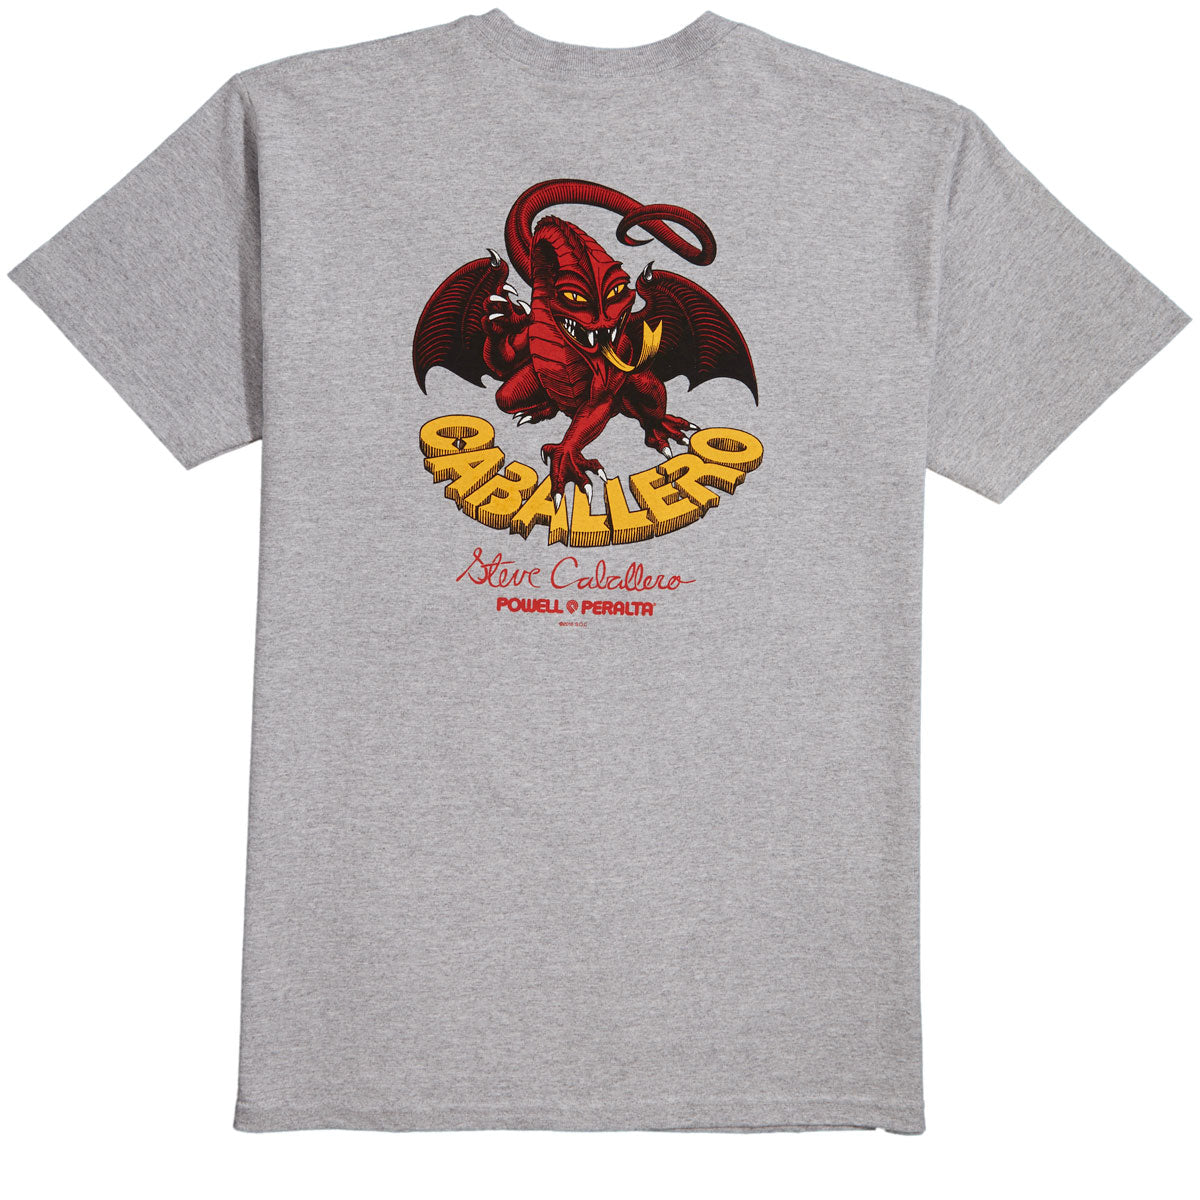 Powell-Peralta Cab Classic Dragon Ii T-Shirt - Athletic Heather image 1